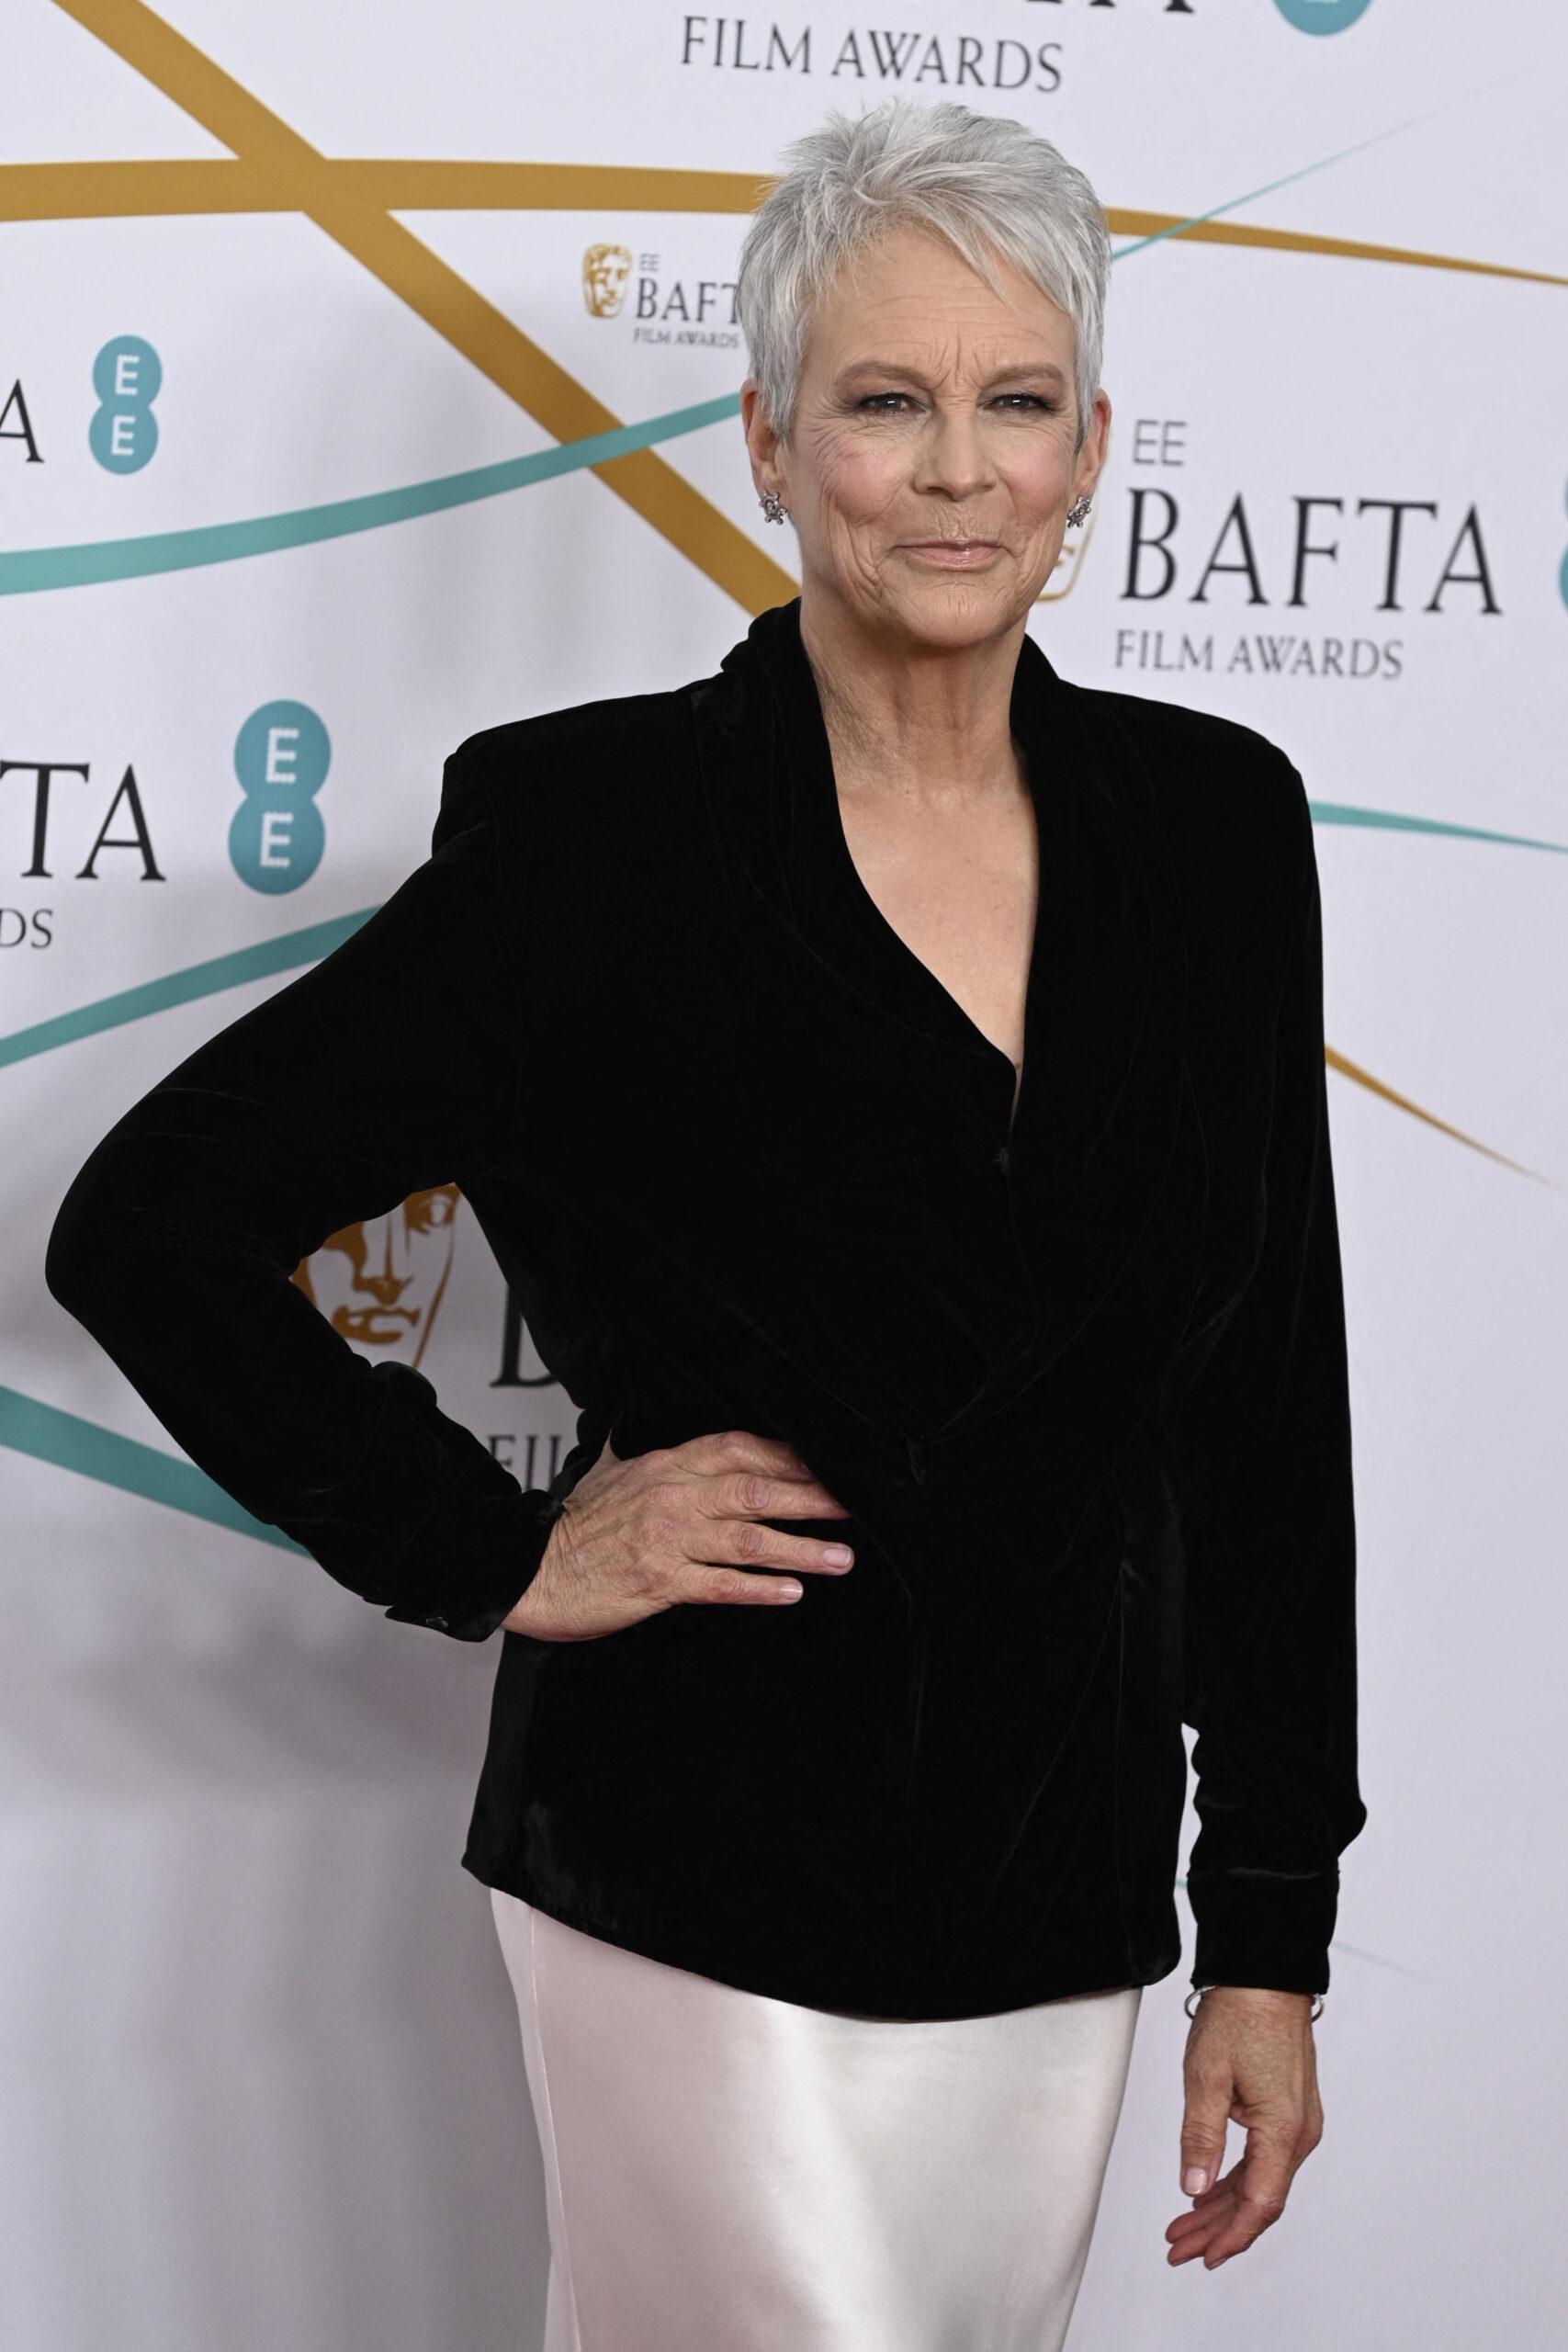 Jamie Lee Curtis at the 76th British Academy Film Awards